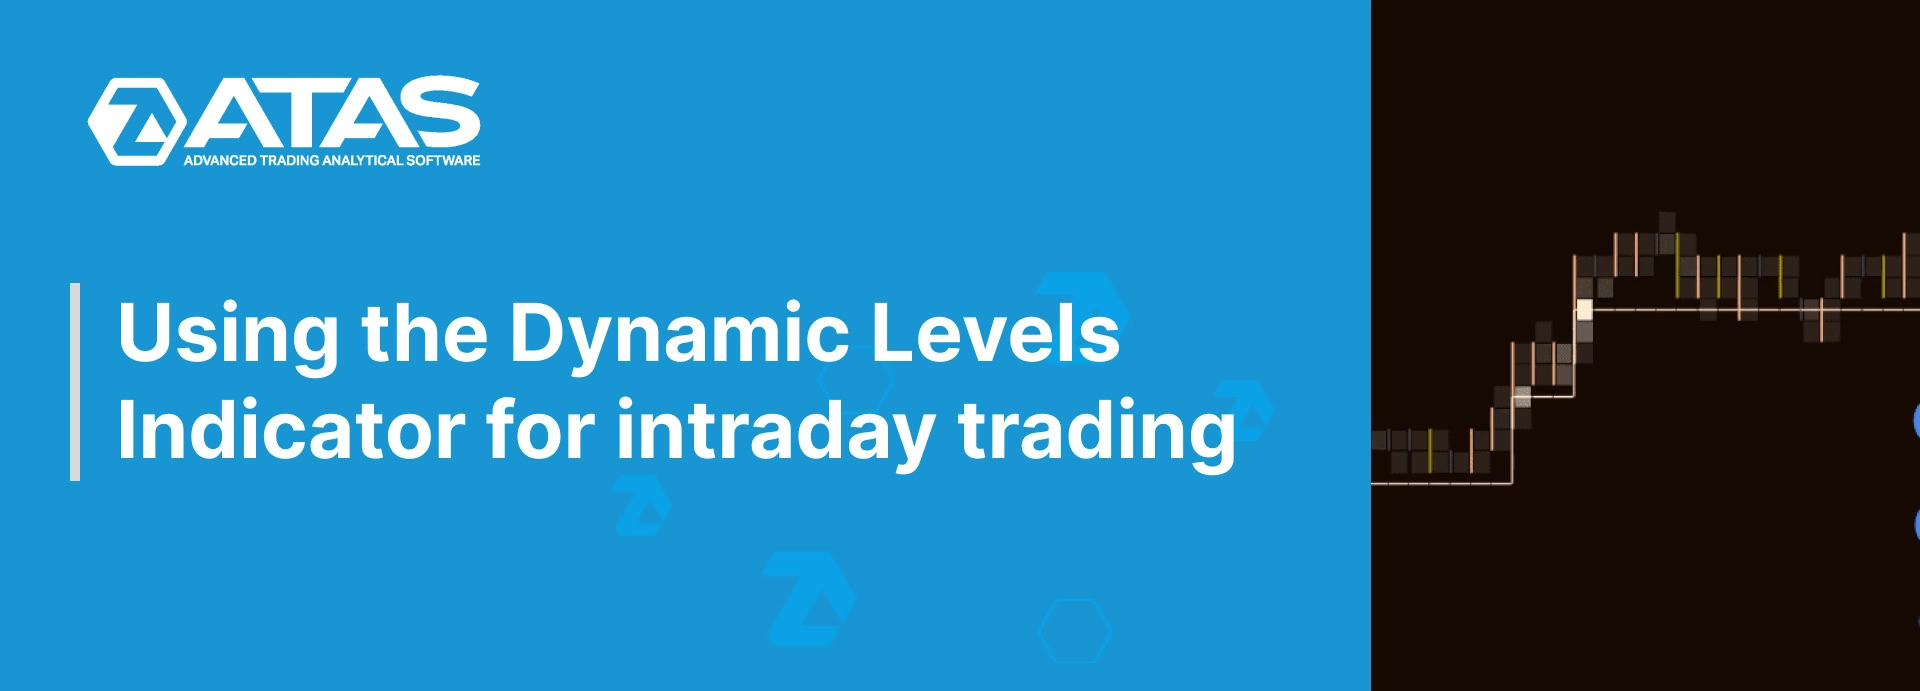 Using the Dynamic Levels Indicator for intraday trading